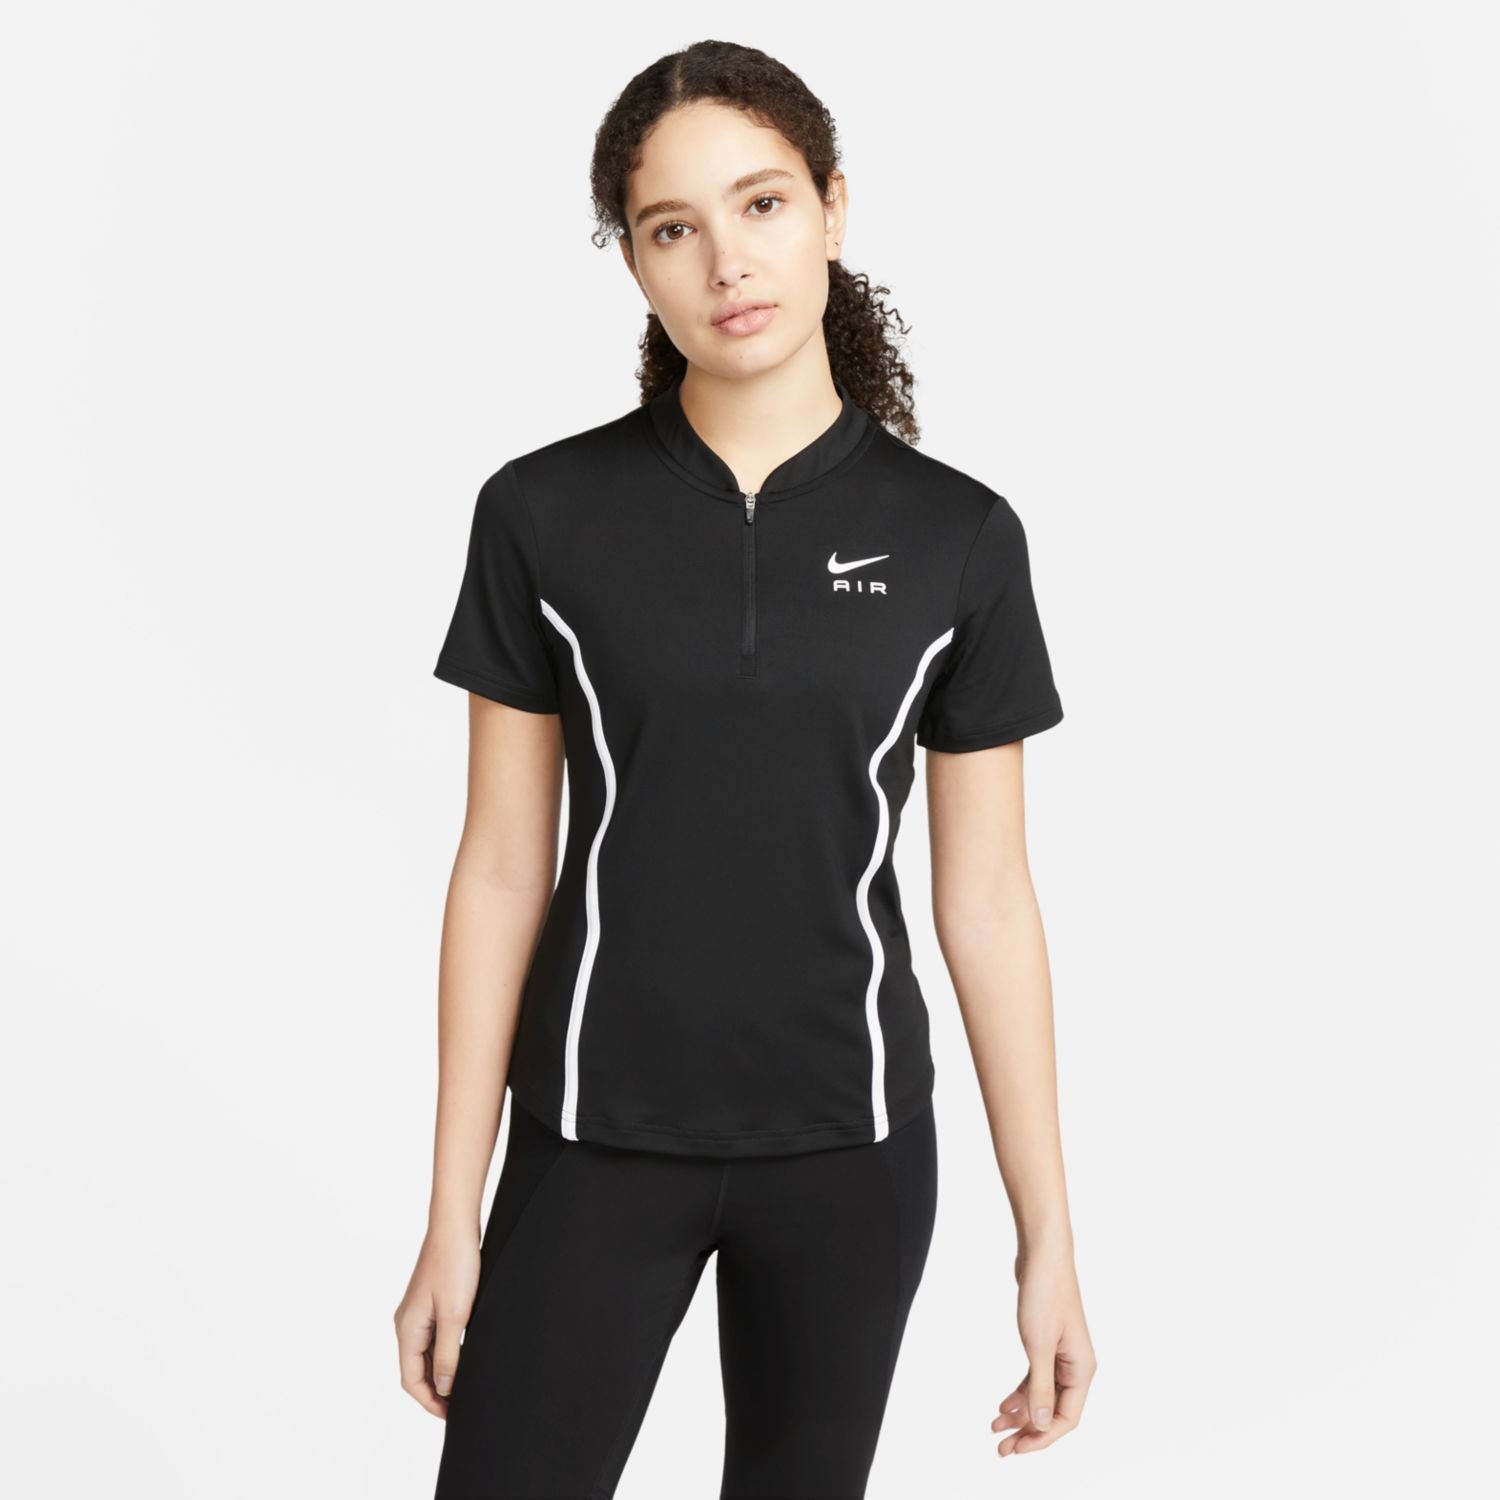 Women's Running Apparel, Page 3